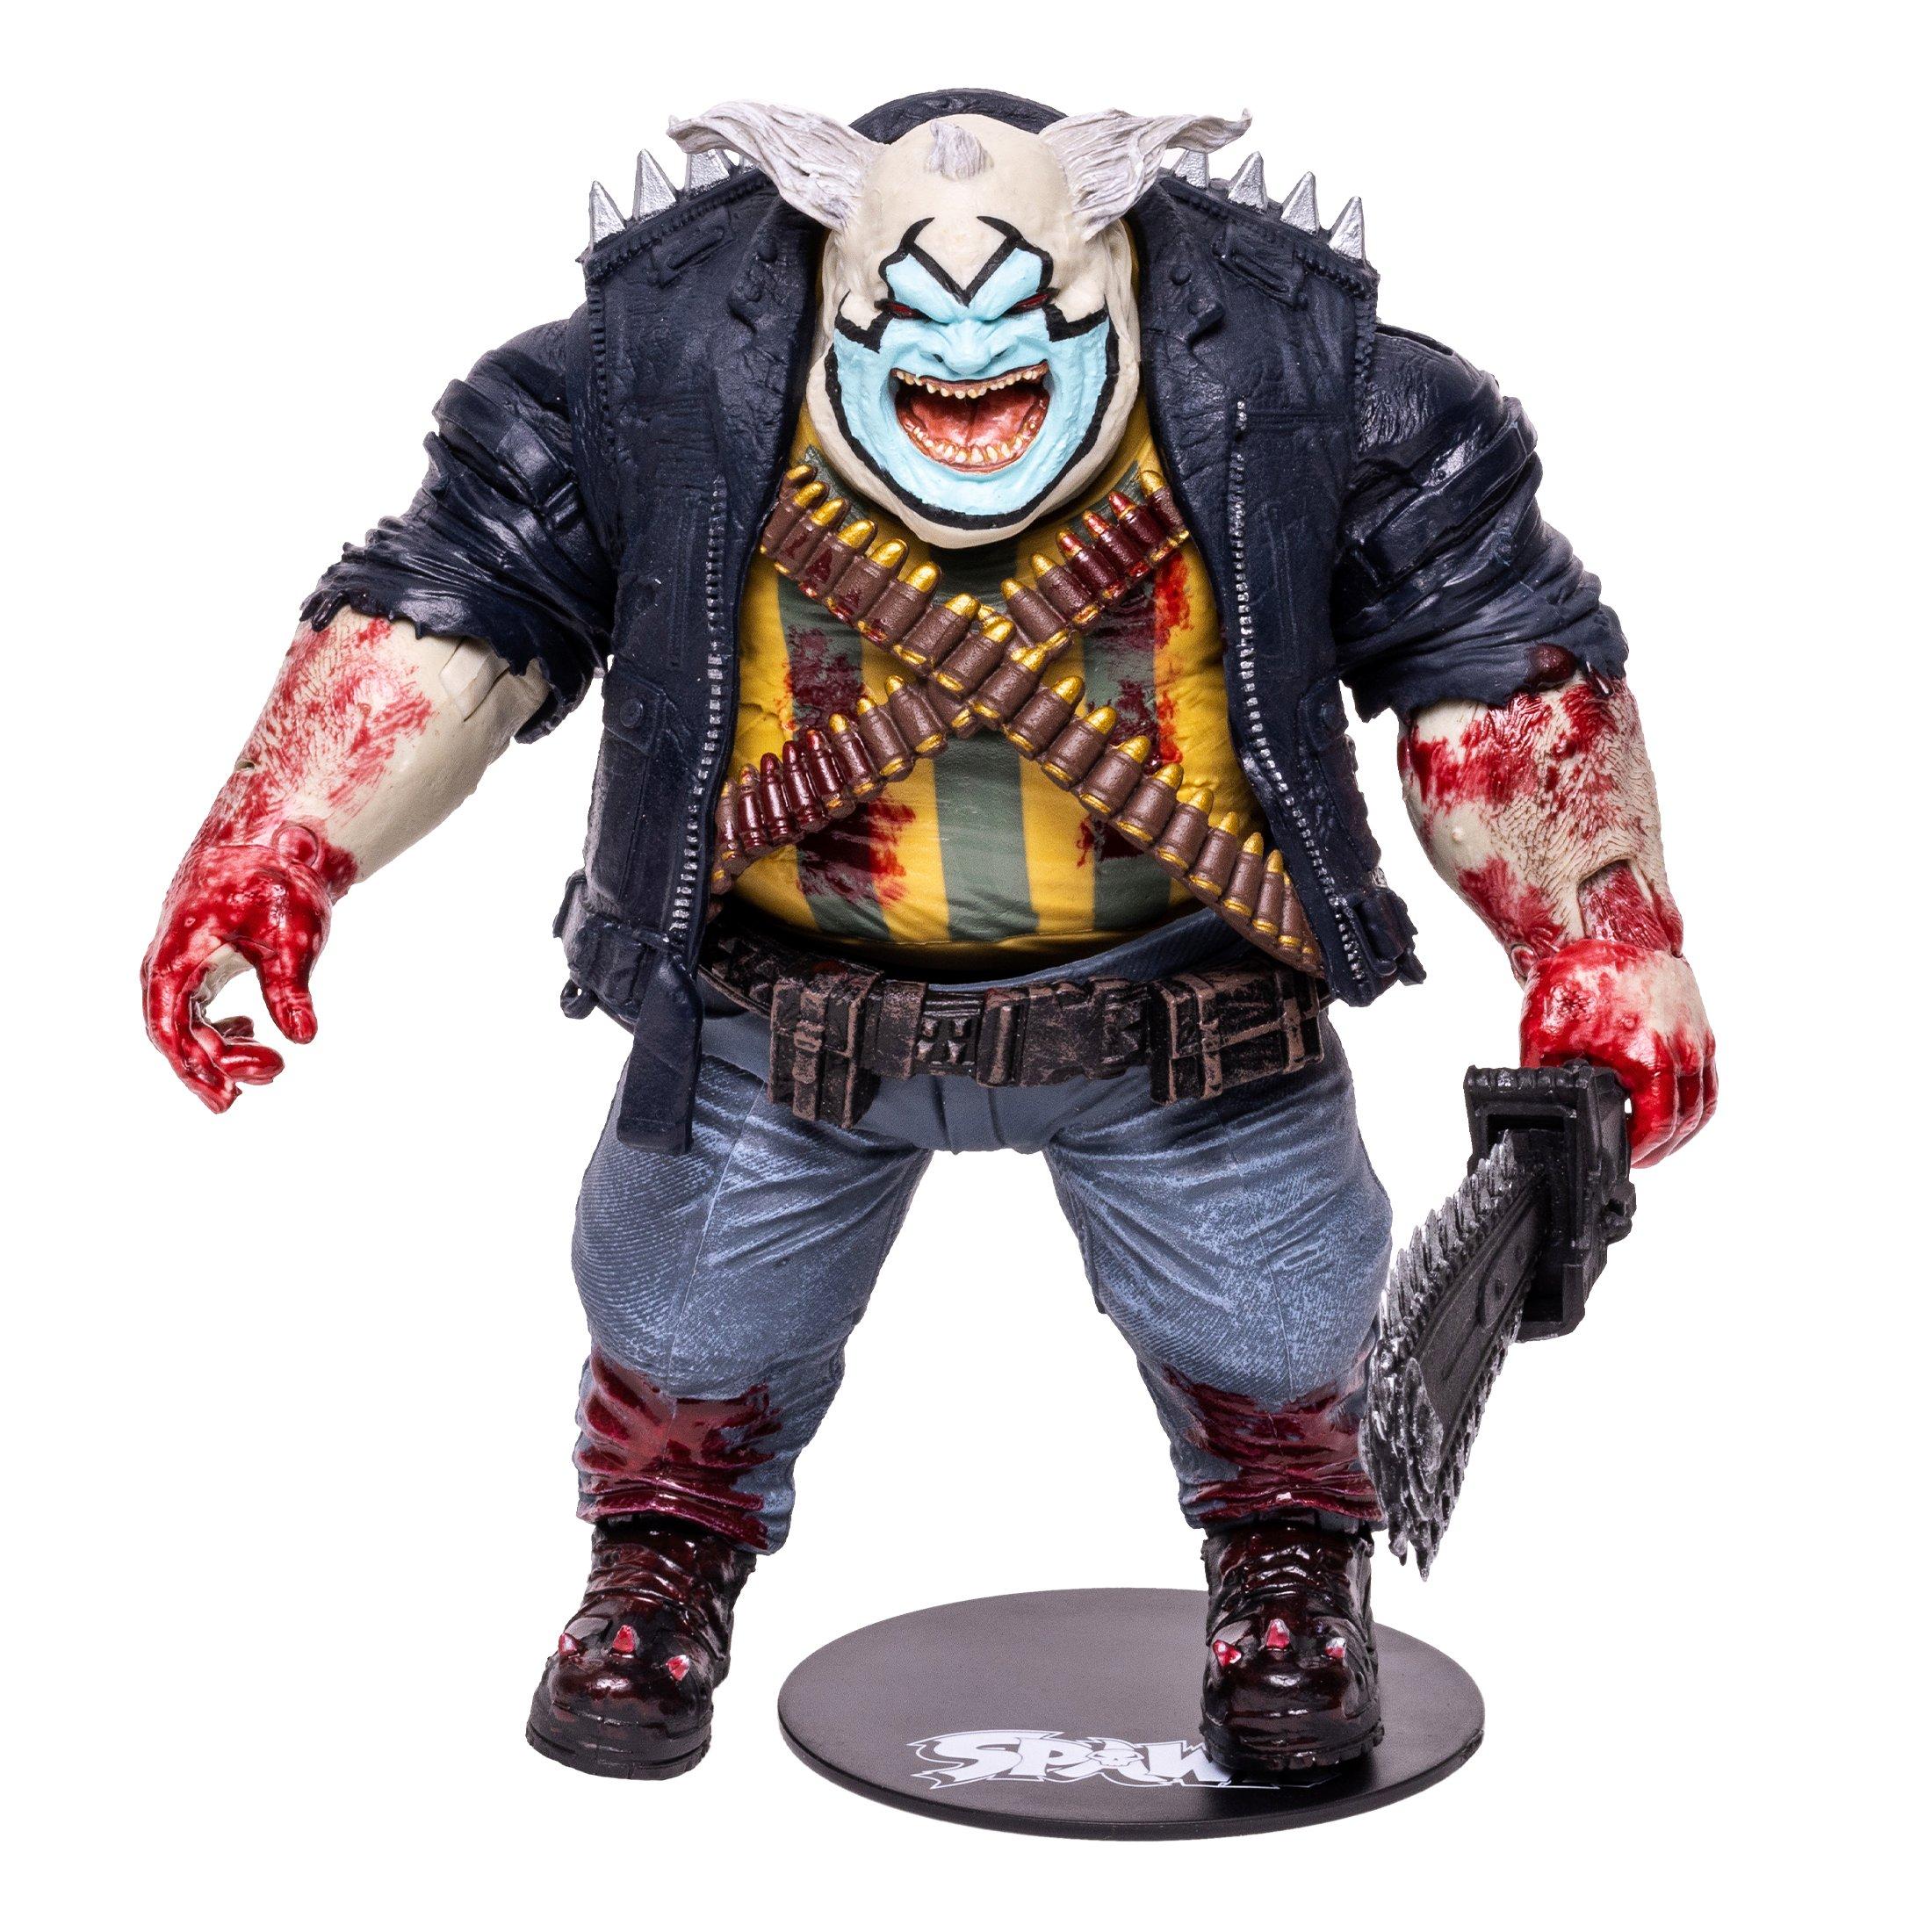 Spawn The Clown 7" Inch Action Figure McFarlane Toys 